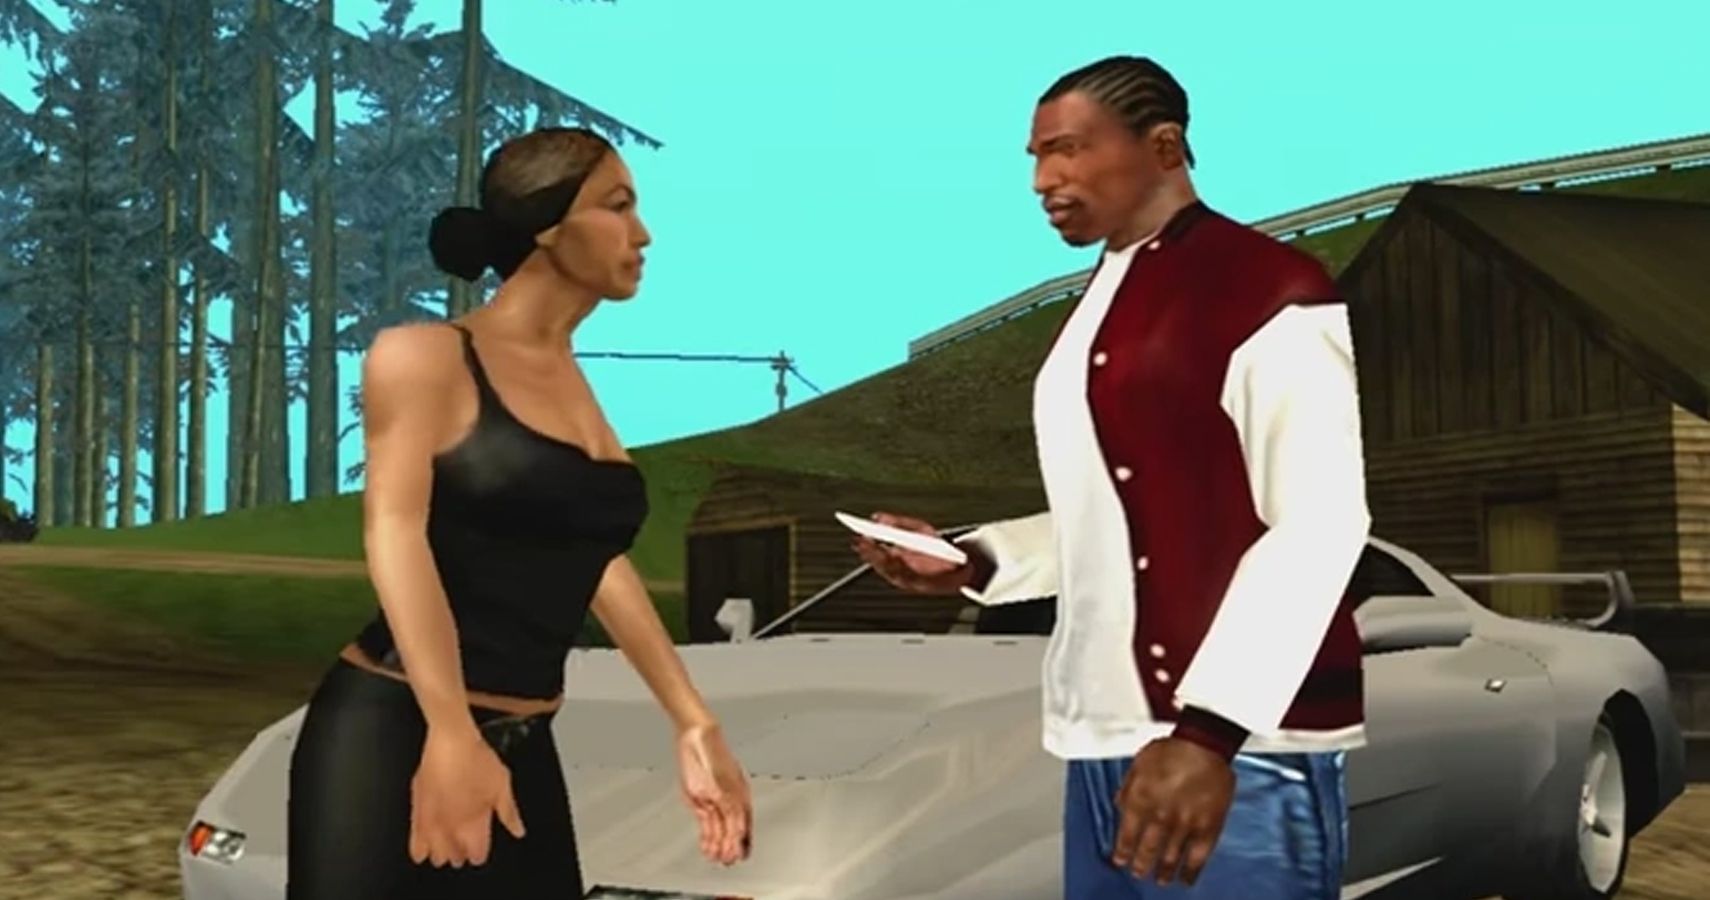 Gta san andreas how to get a girlfriend in bed cheat for pc